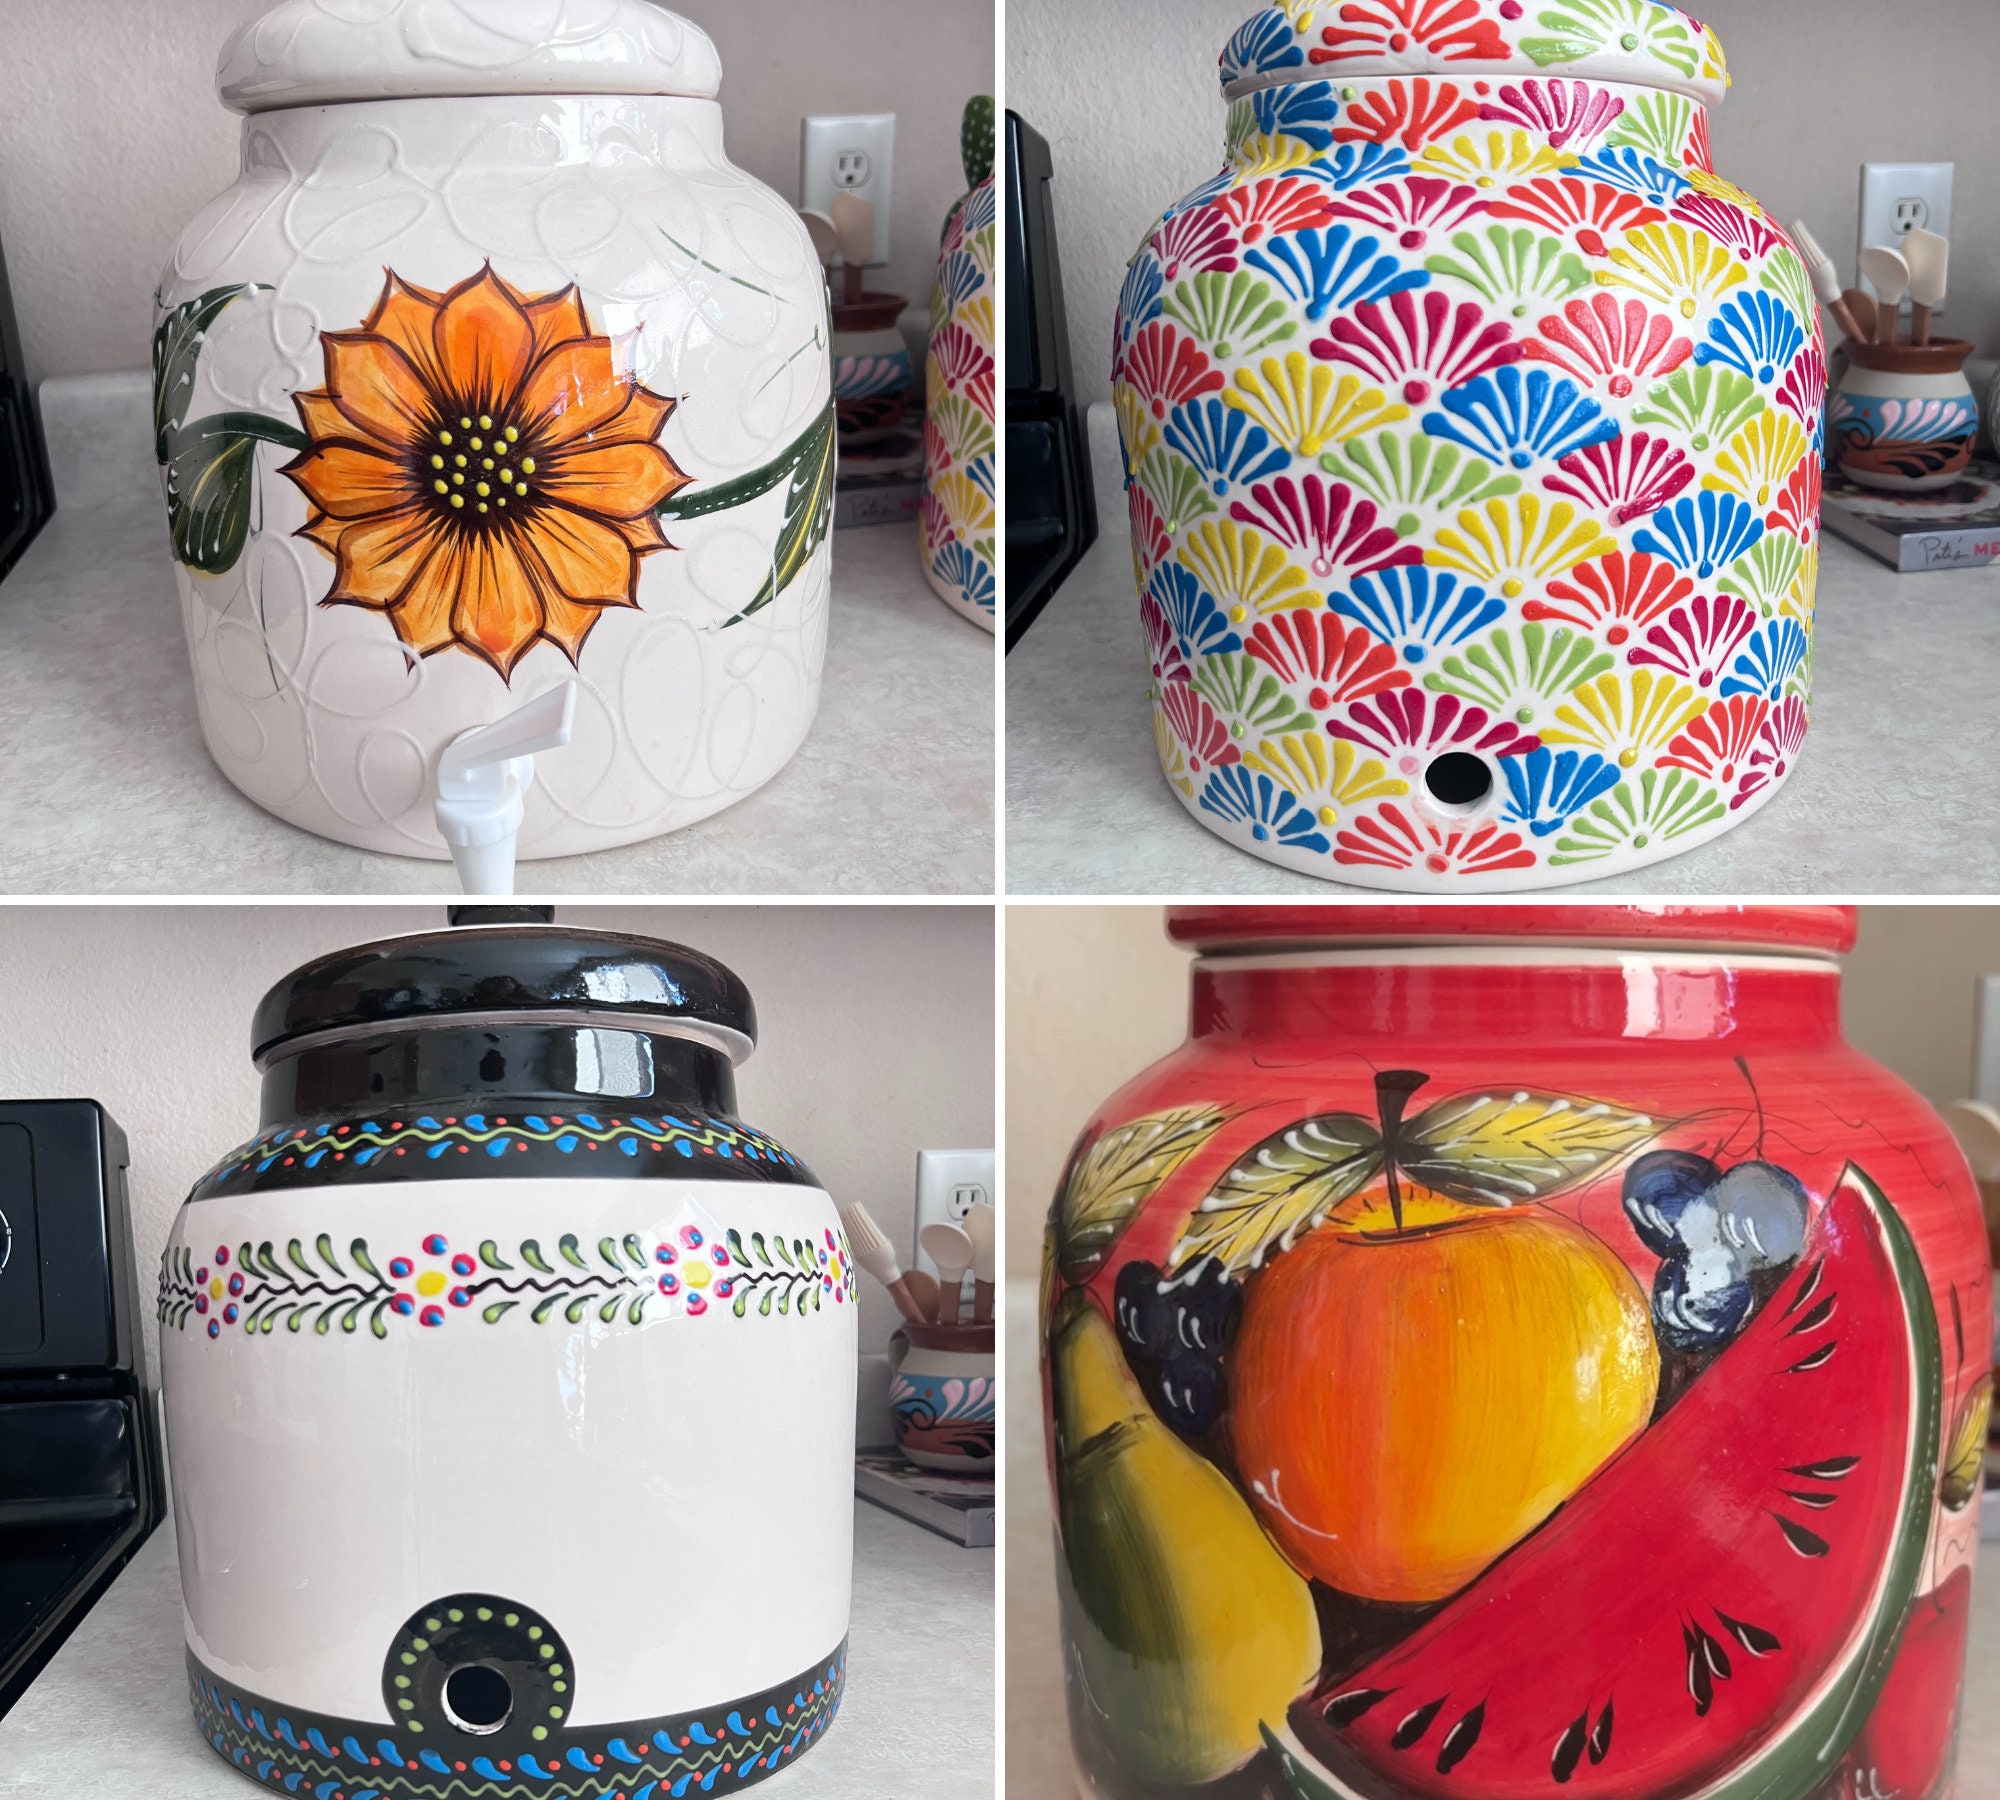 Milk Can WATER CROCK, Talavera Mexican Pottery, Water Dispenser, Glazed  Paint 